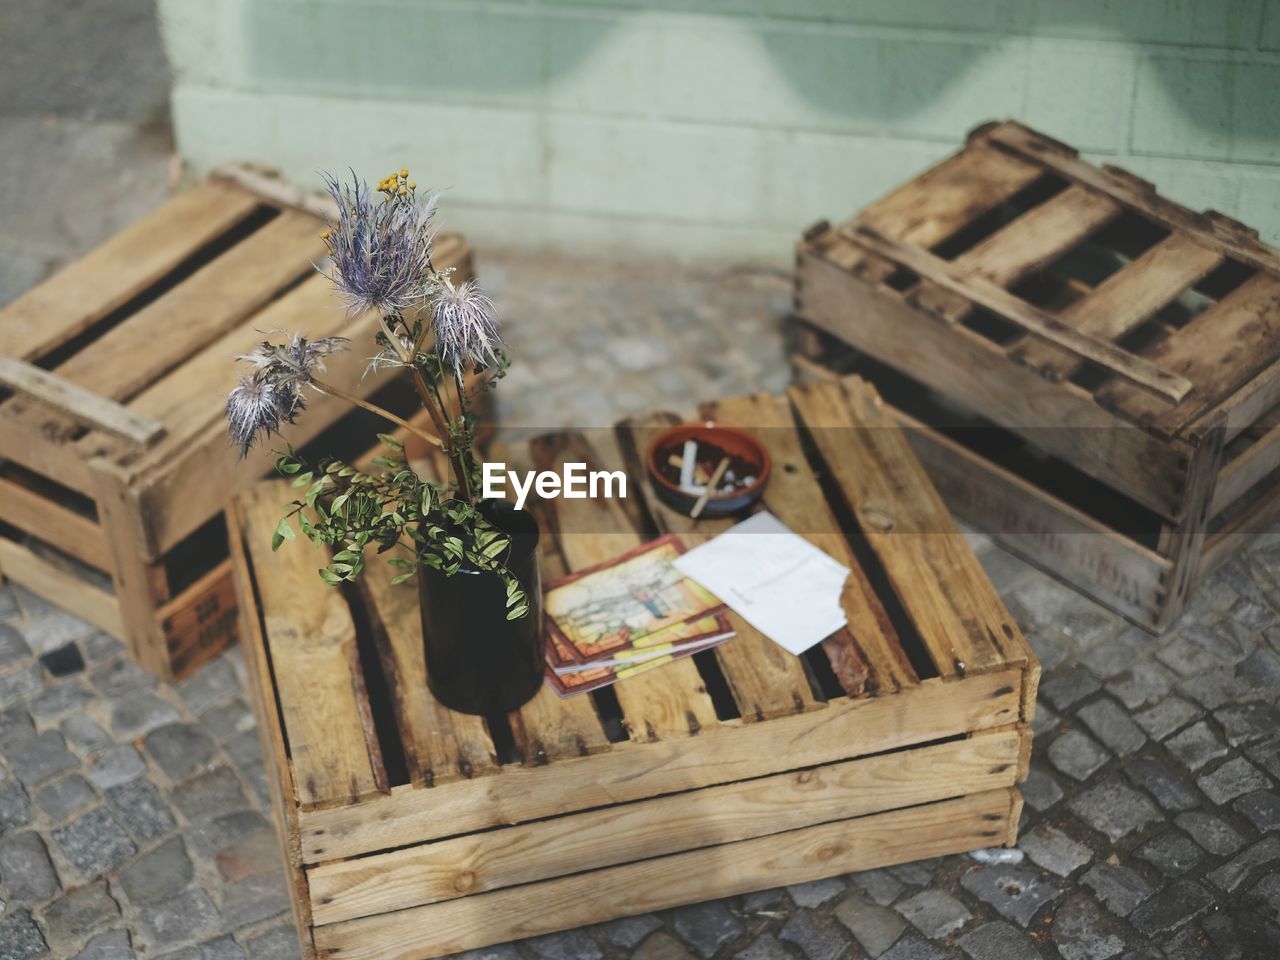 High angle view of potted plant with books and cigarette on crate